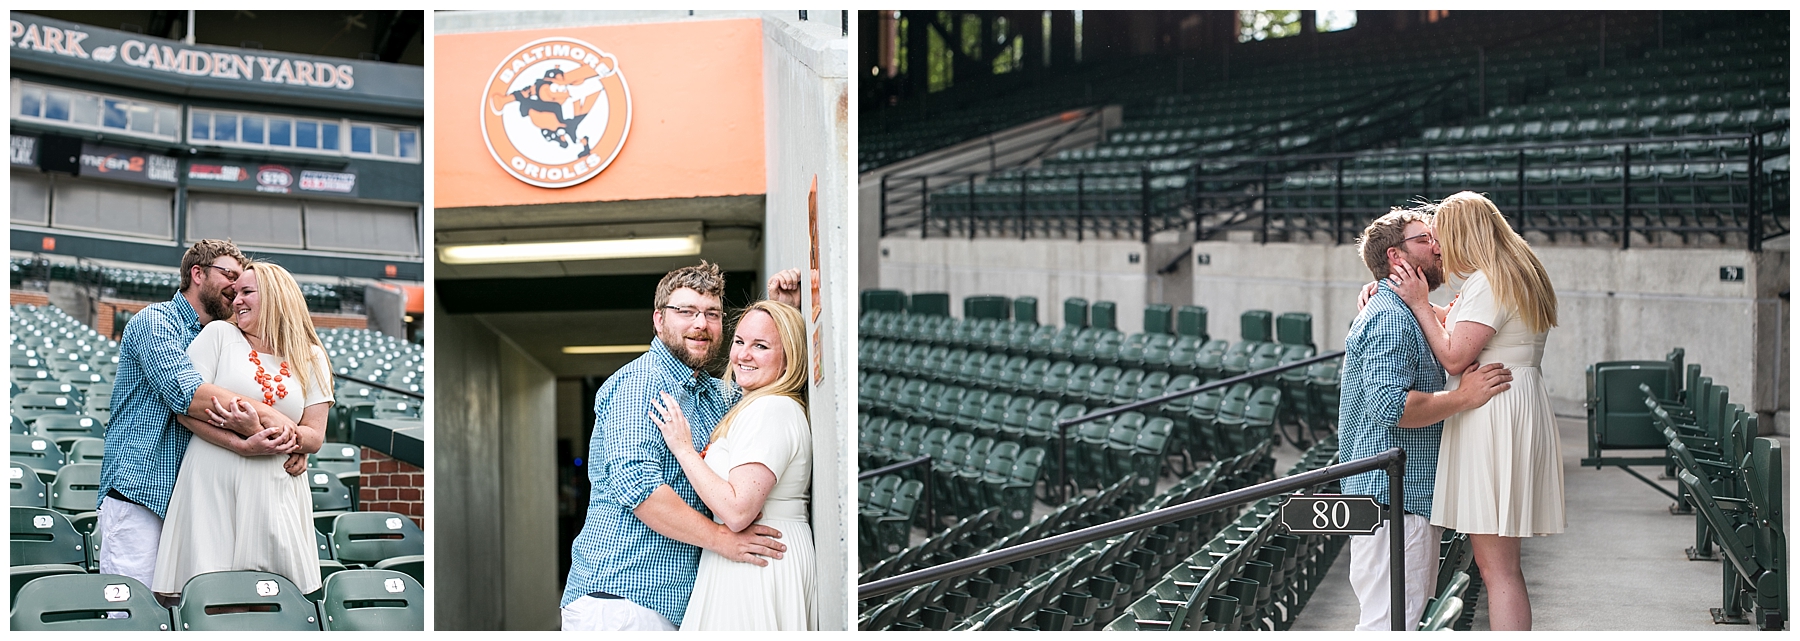 Tess Ray Camden Yards Engagement Session Living Radiant Photography photos_0020.jpg